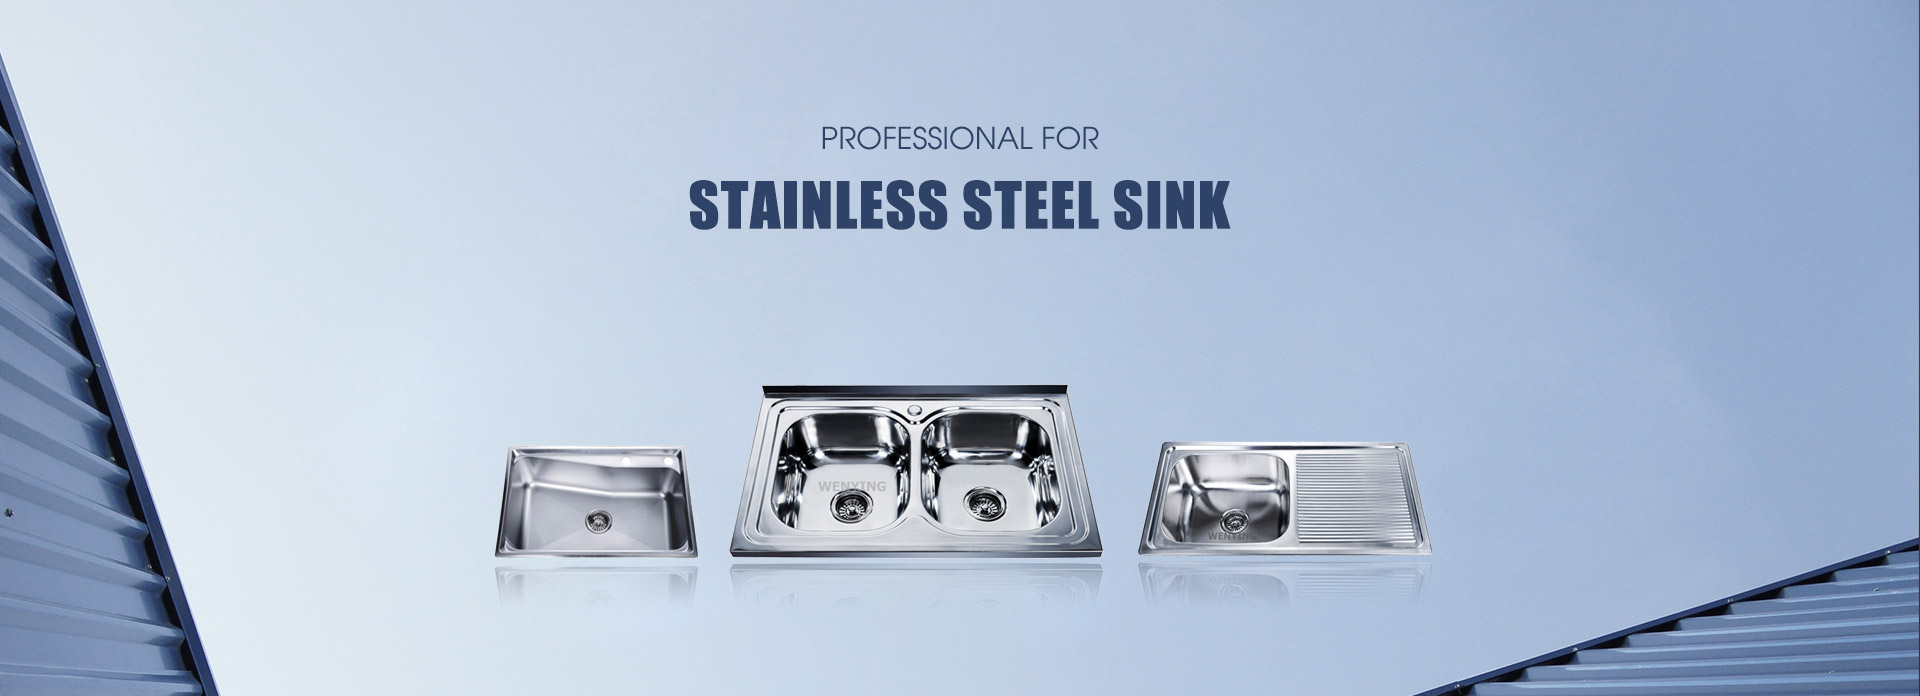 professional for Stainless Steel Sink